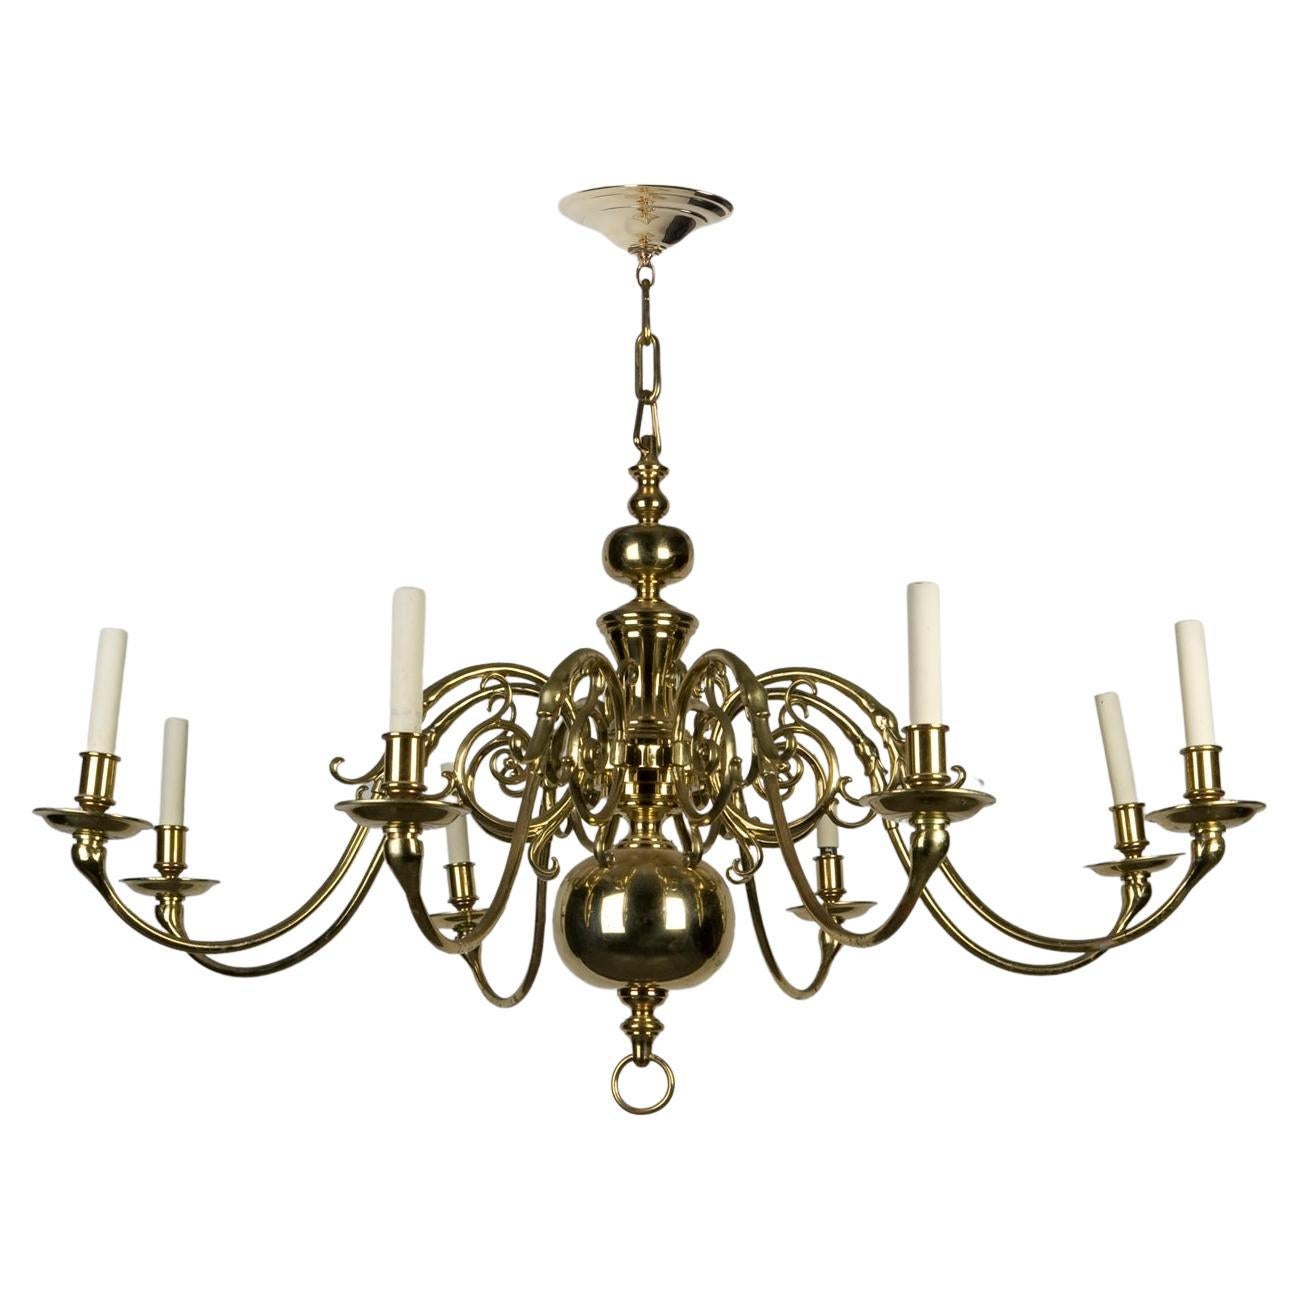 Solid Brass Eight Arm Dutch Colonial Style Chandelier, Circa 1950s For Sale